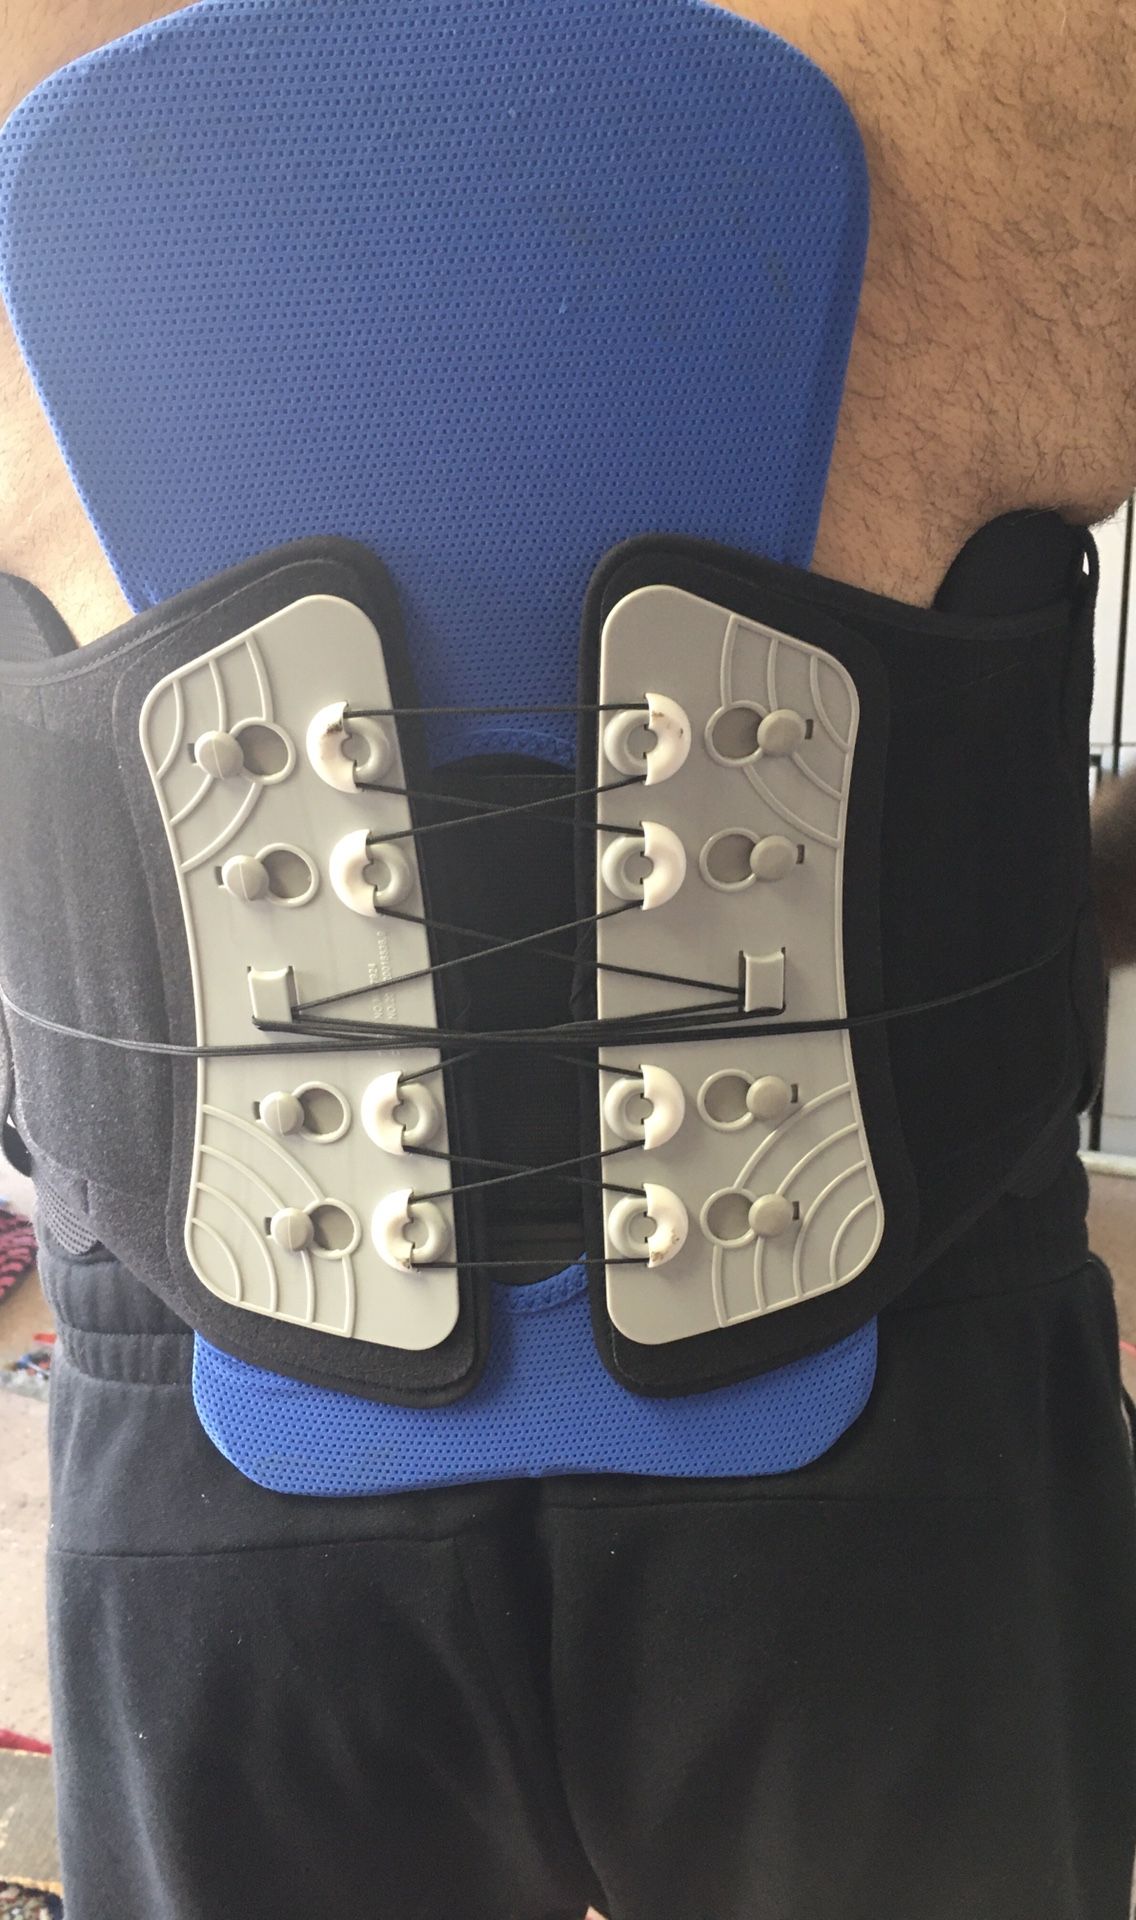 Back Brace for Lower Back Pain Relief for Men & Women -Comfortable Belt Support for Herniated Disc, Sciatica, and Scoliosis with Removable Lumbar Pain